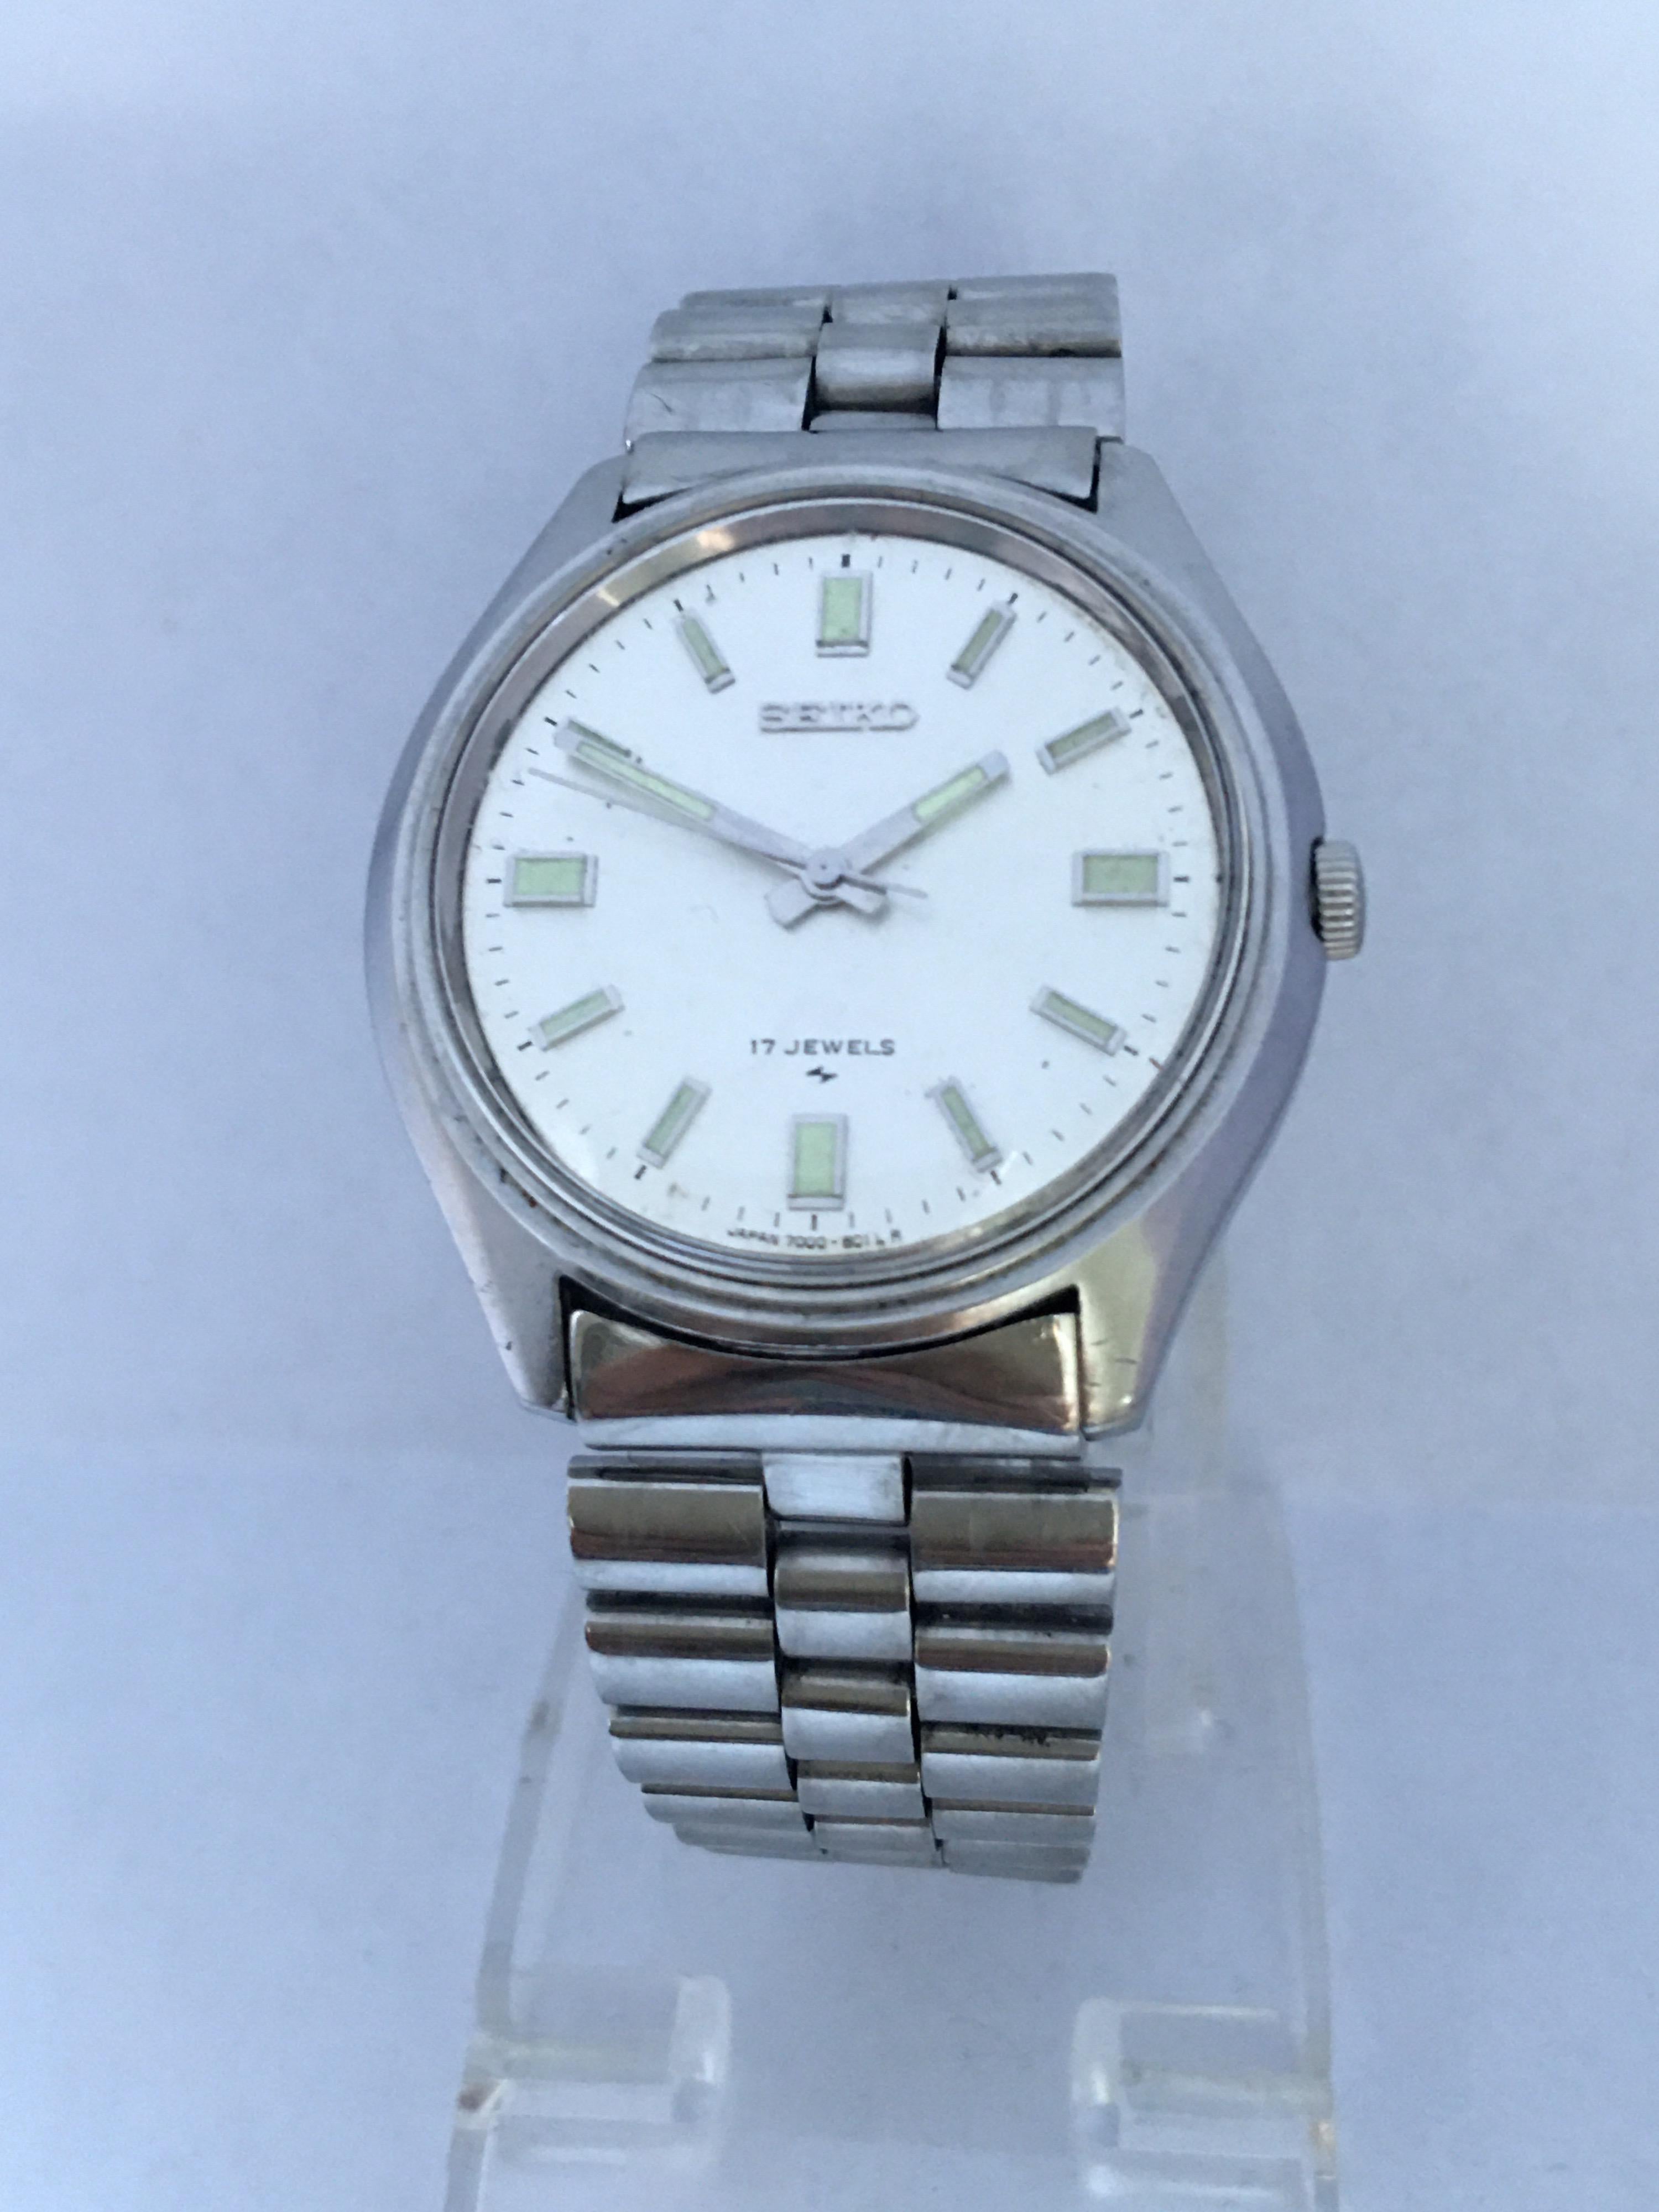 Vintage 1970s Stainless Steel Seiko 17 Jewels Mechanical Watch 5